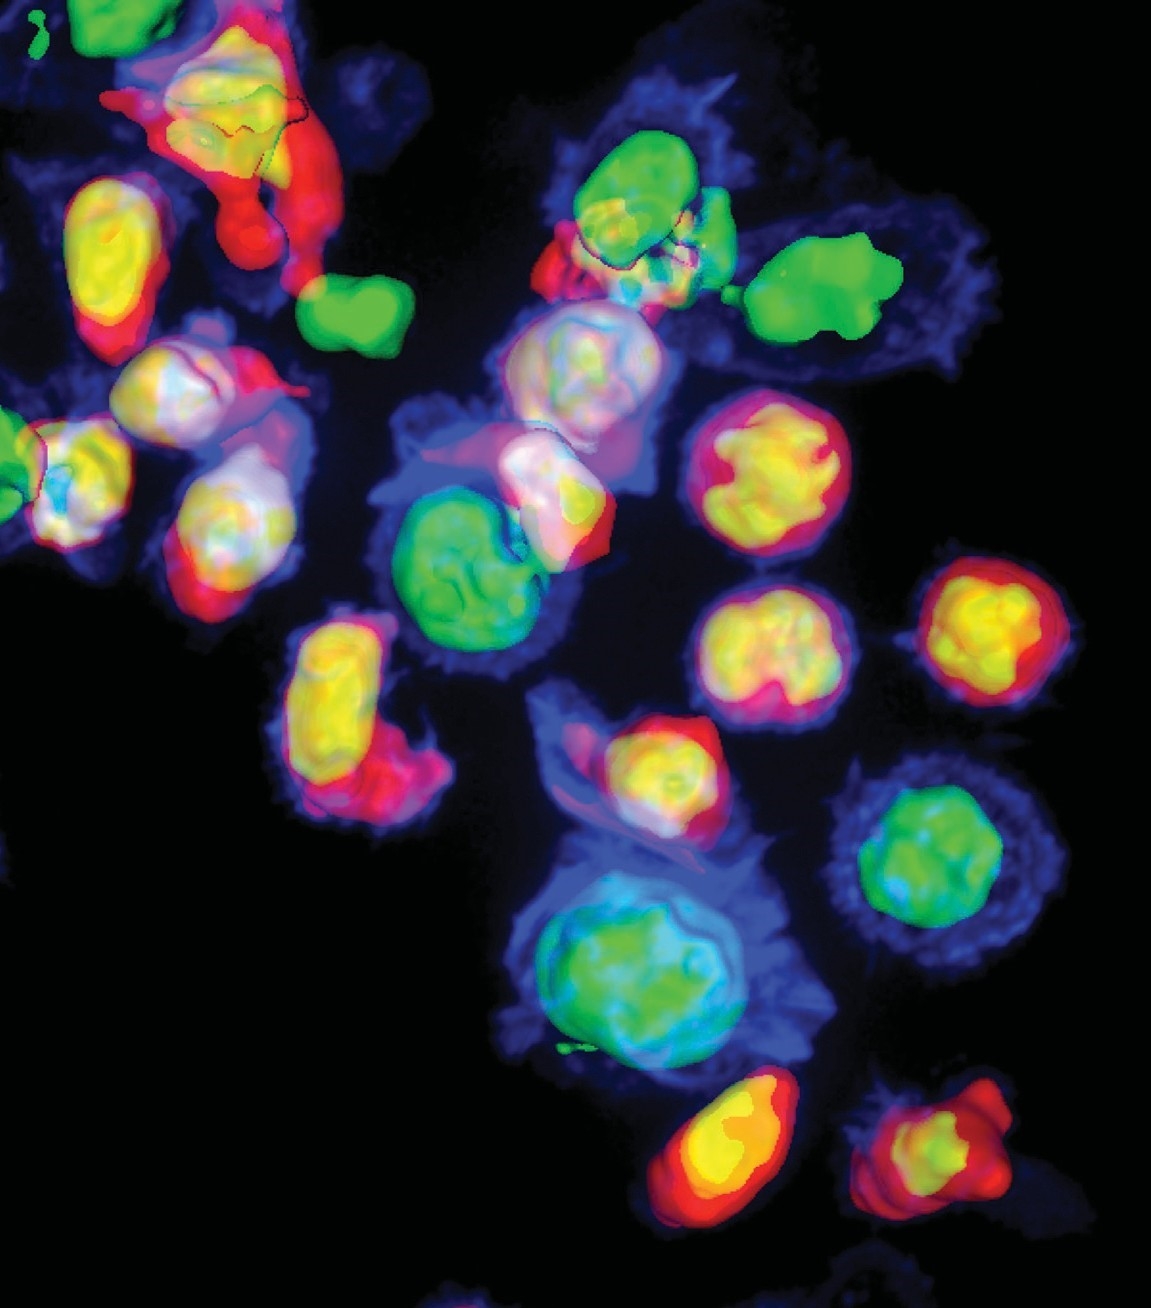 on the offensive: So-called “killer” T-cells (seen in pink and yellow) attacking cells that are infected with HIV (seen in blue and green). Photo: Sudha Kumari